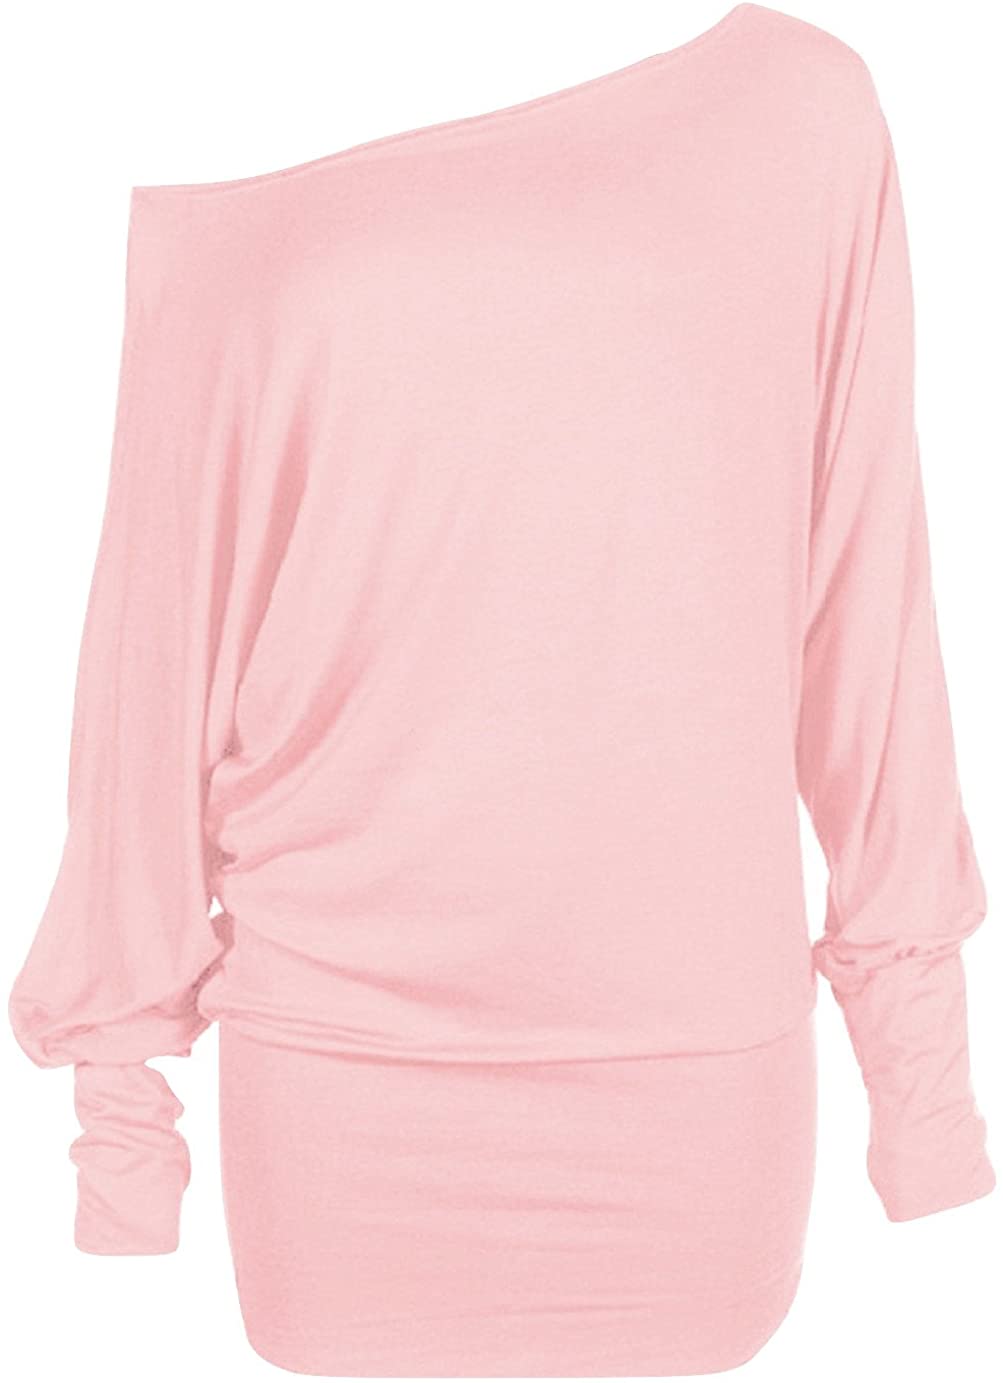 Hot Hanger Womens Batwing Tunic Top Long Sleeve Off Shoulder Plus Size 8-30 : Nude Pink : Size - 24-26 3XL